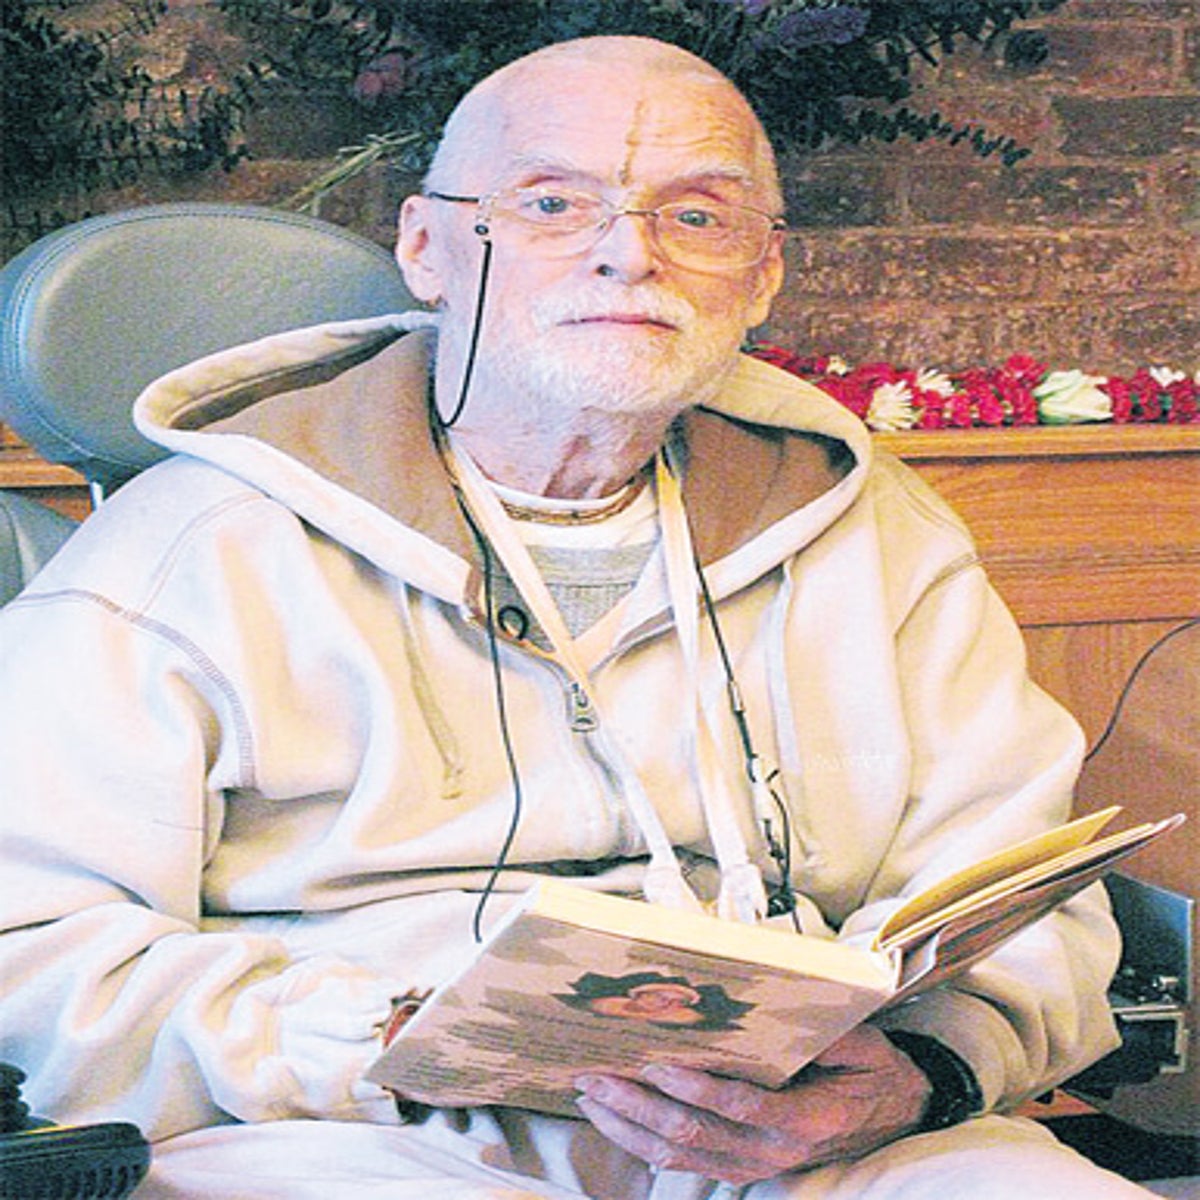 Former US Hare Krishna leader dies in India at 74